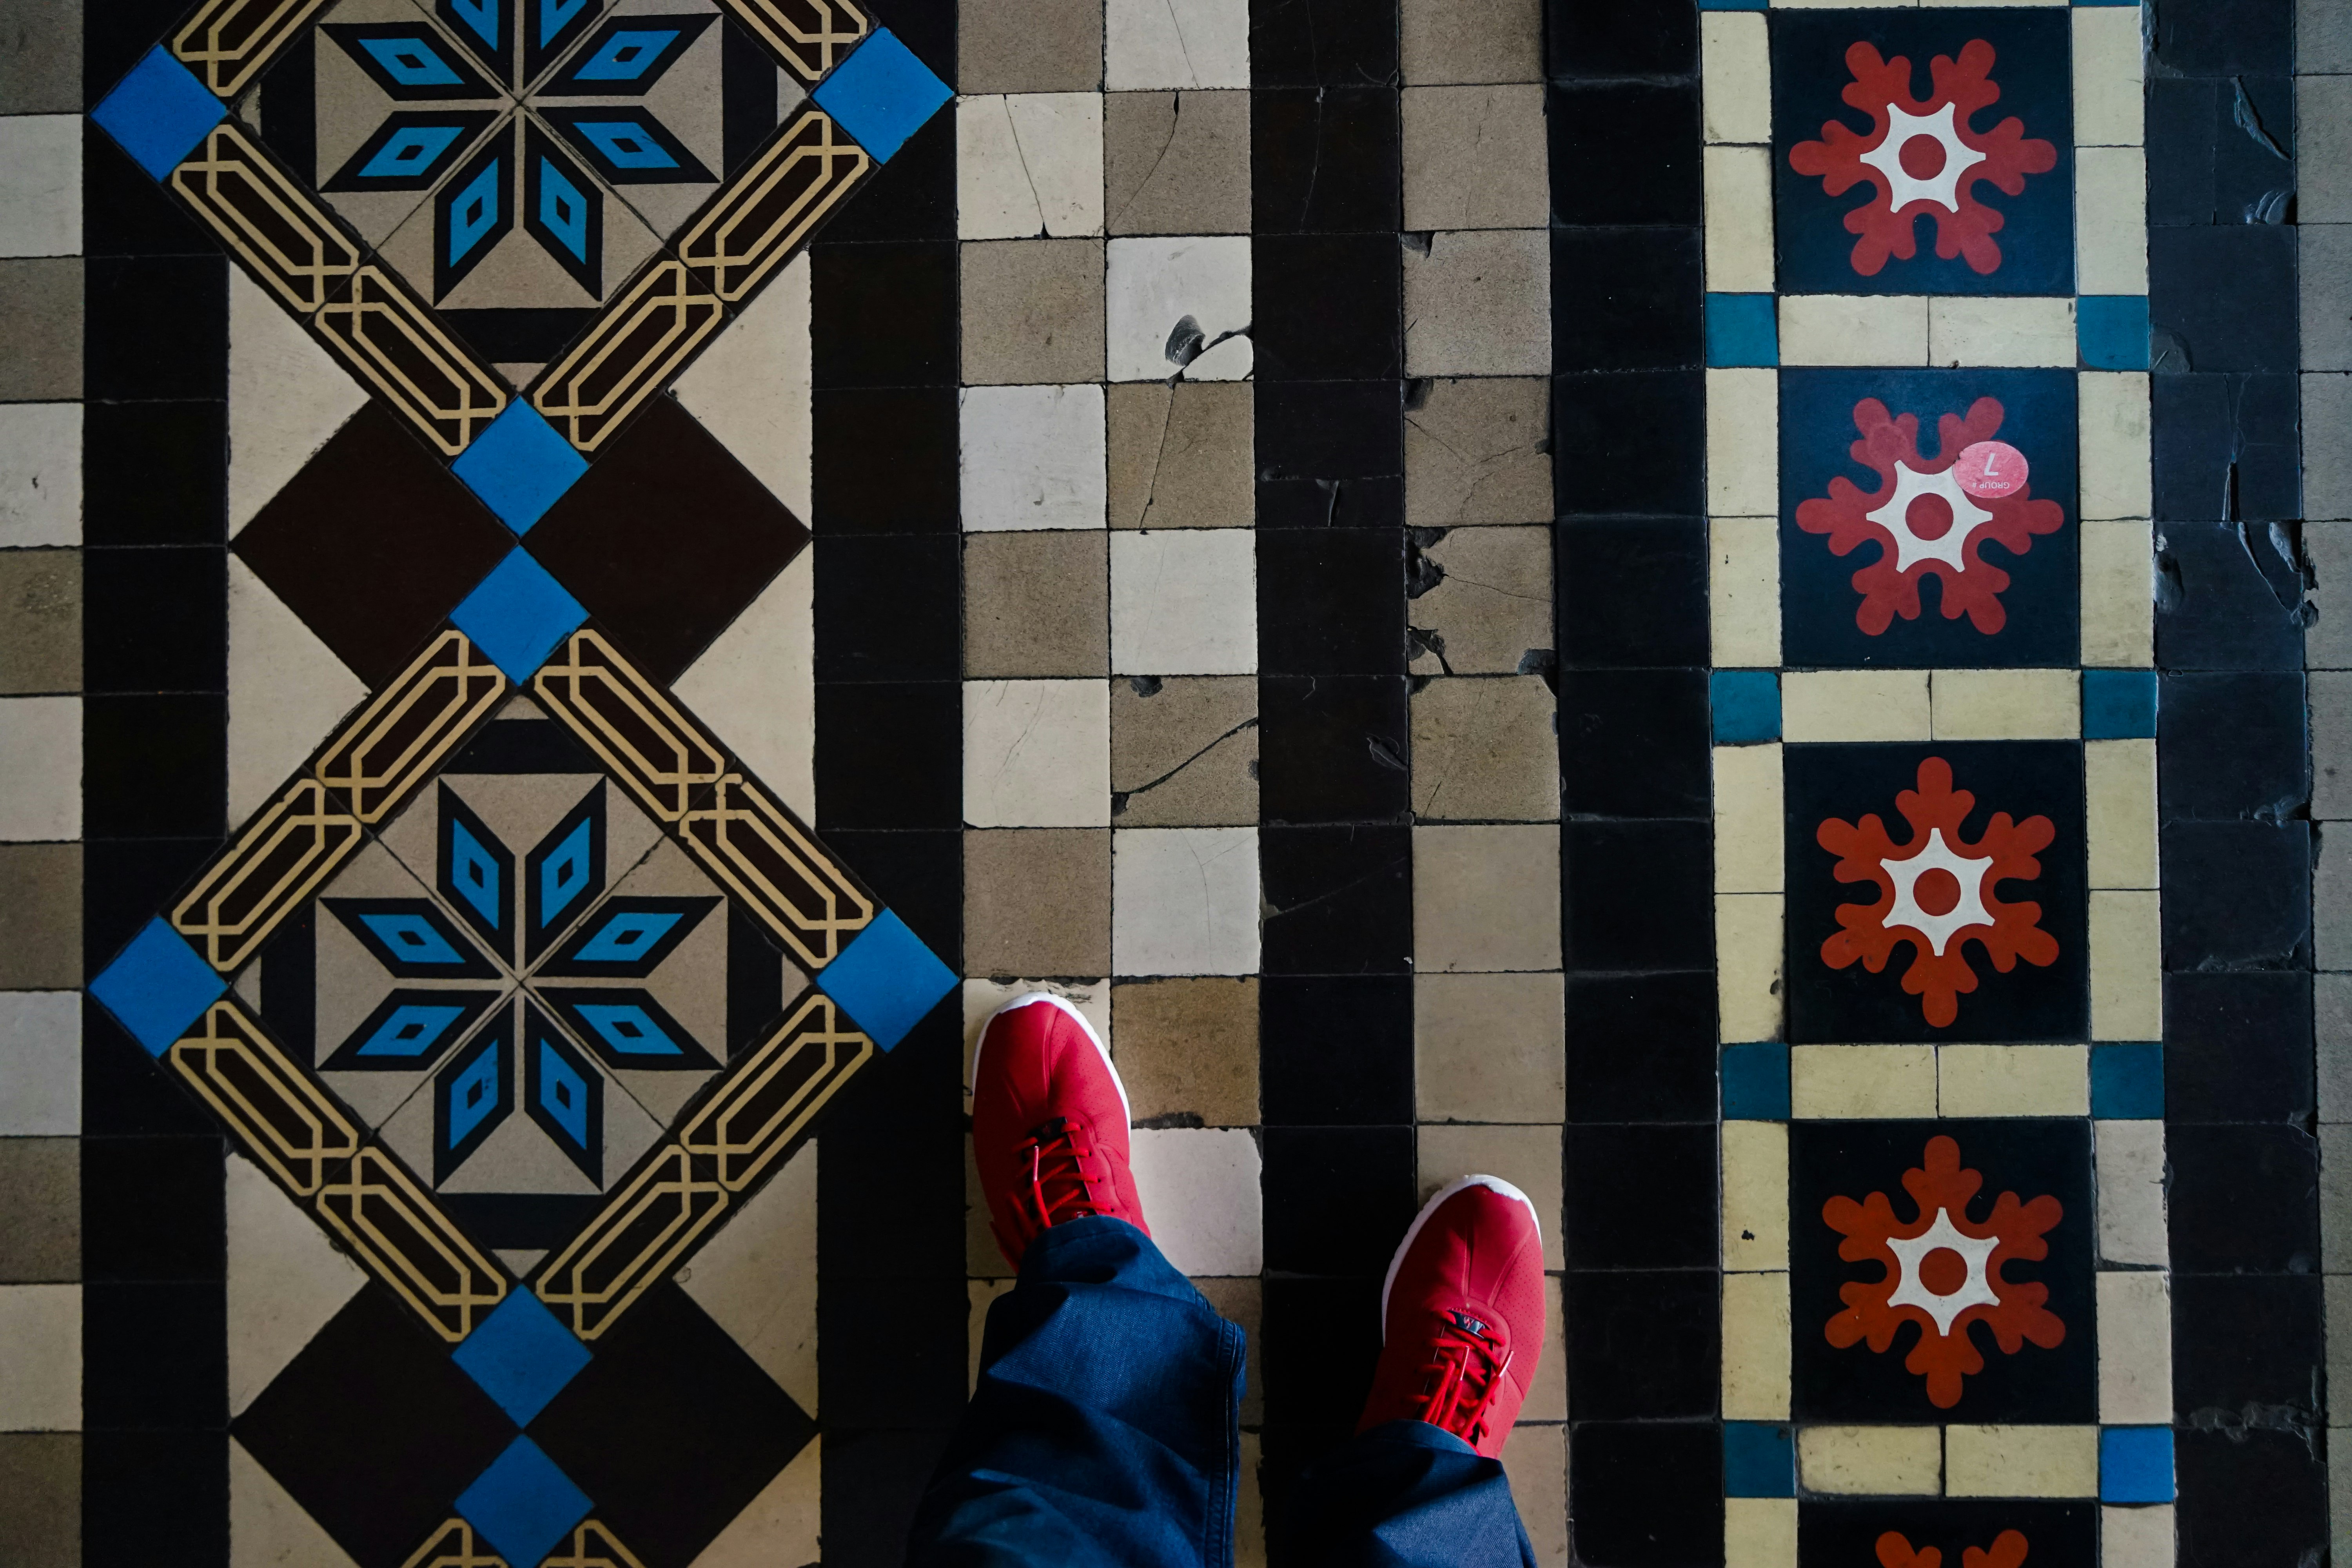 Shoes on the tiled floors. 